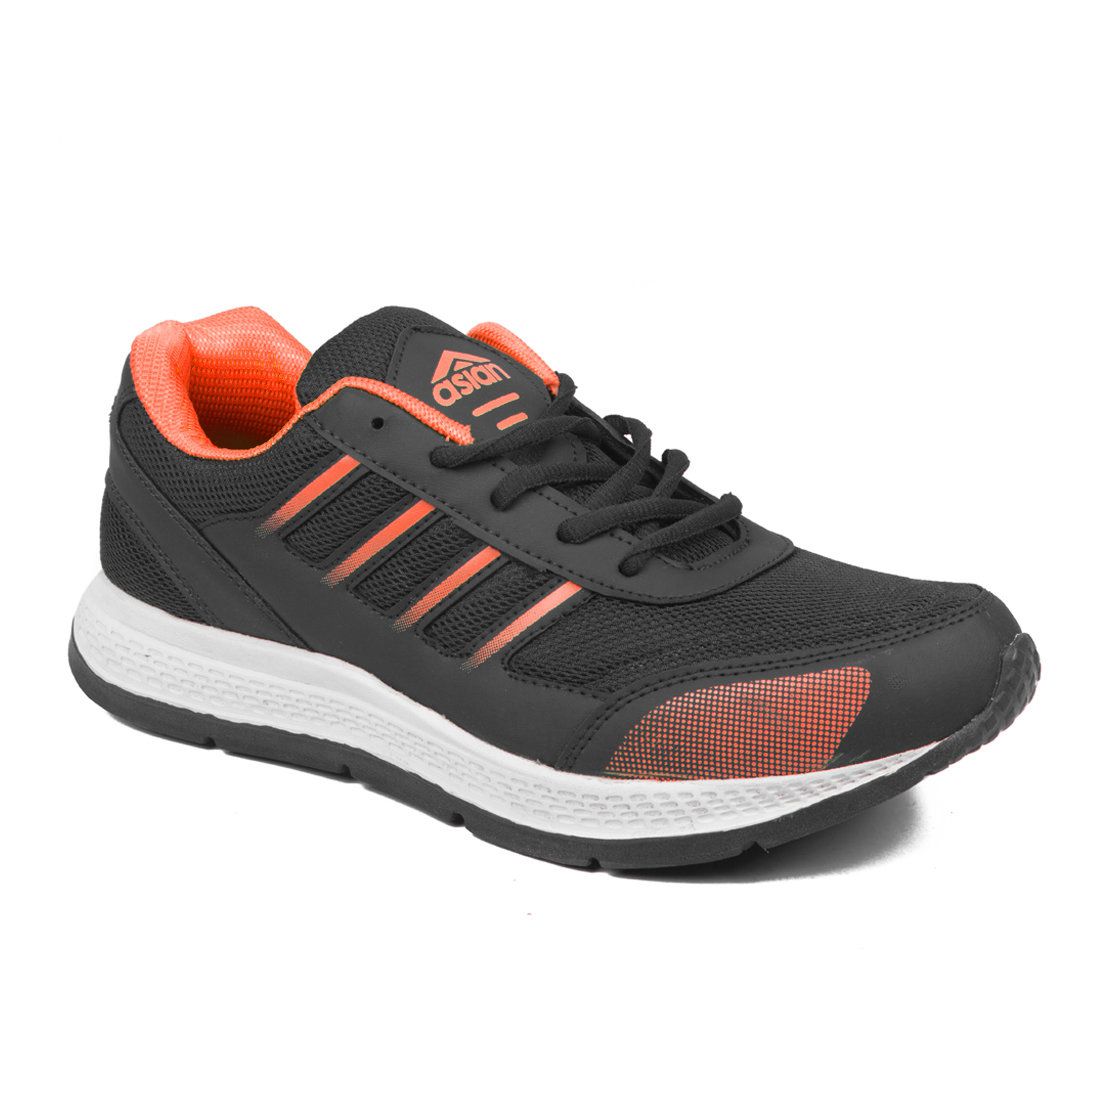 Asian Gray Running Shoes Buy Asian Gray Running Shoes Online At Best 